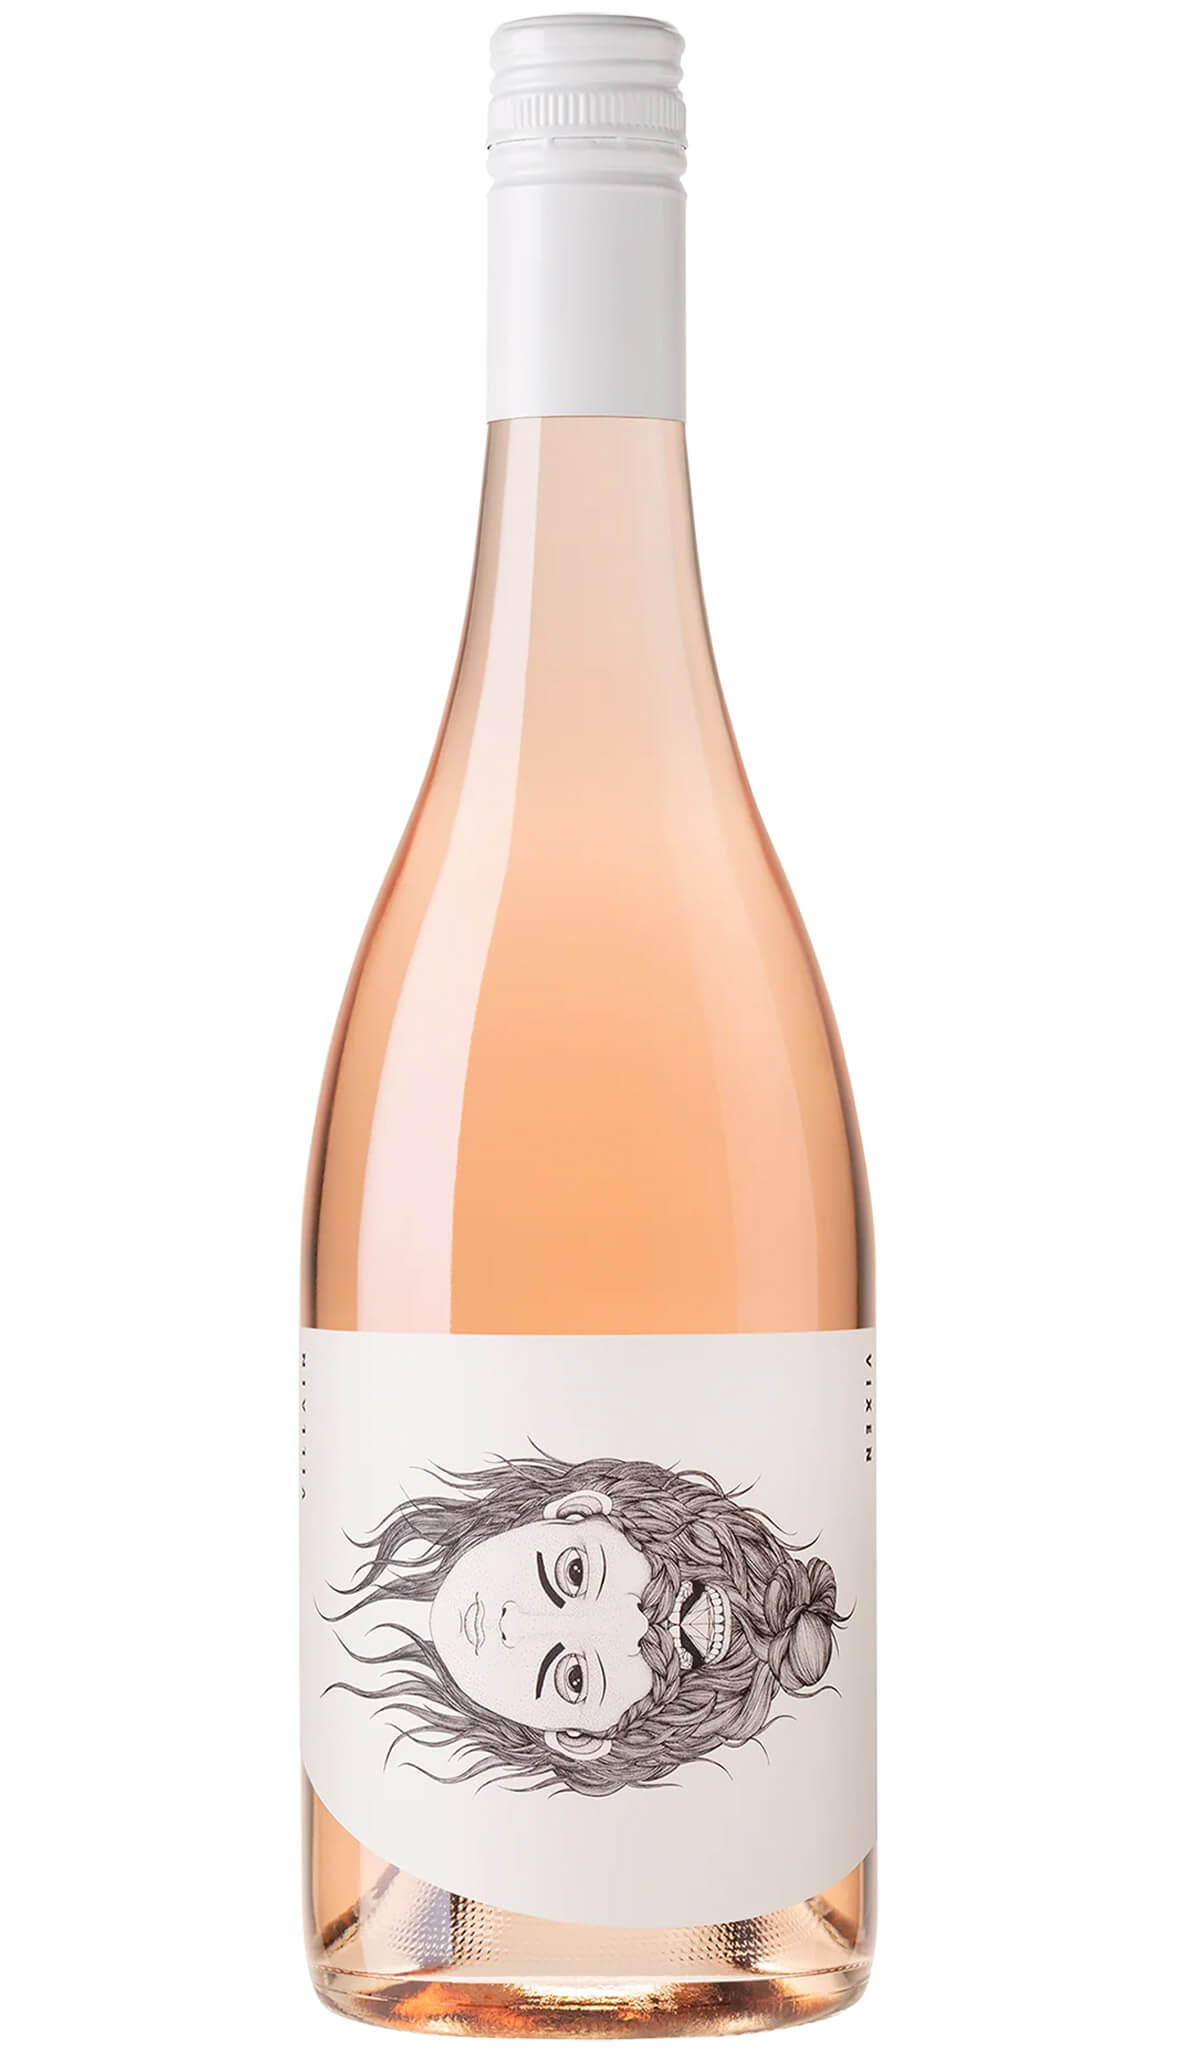 Find out more, explore the range and purchase Hentley Farm Villain & Vixen Rosé 2022 (Barossa) available online at Wine Sellers Direct - Australia's independent liquor specialists.